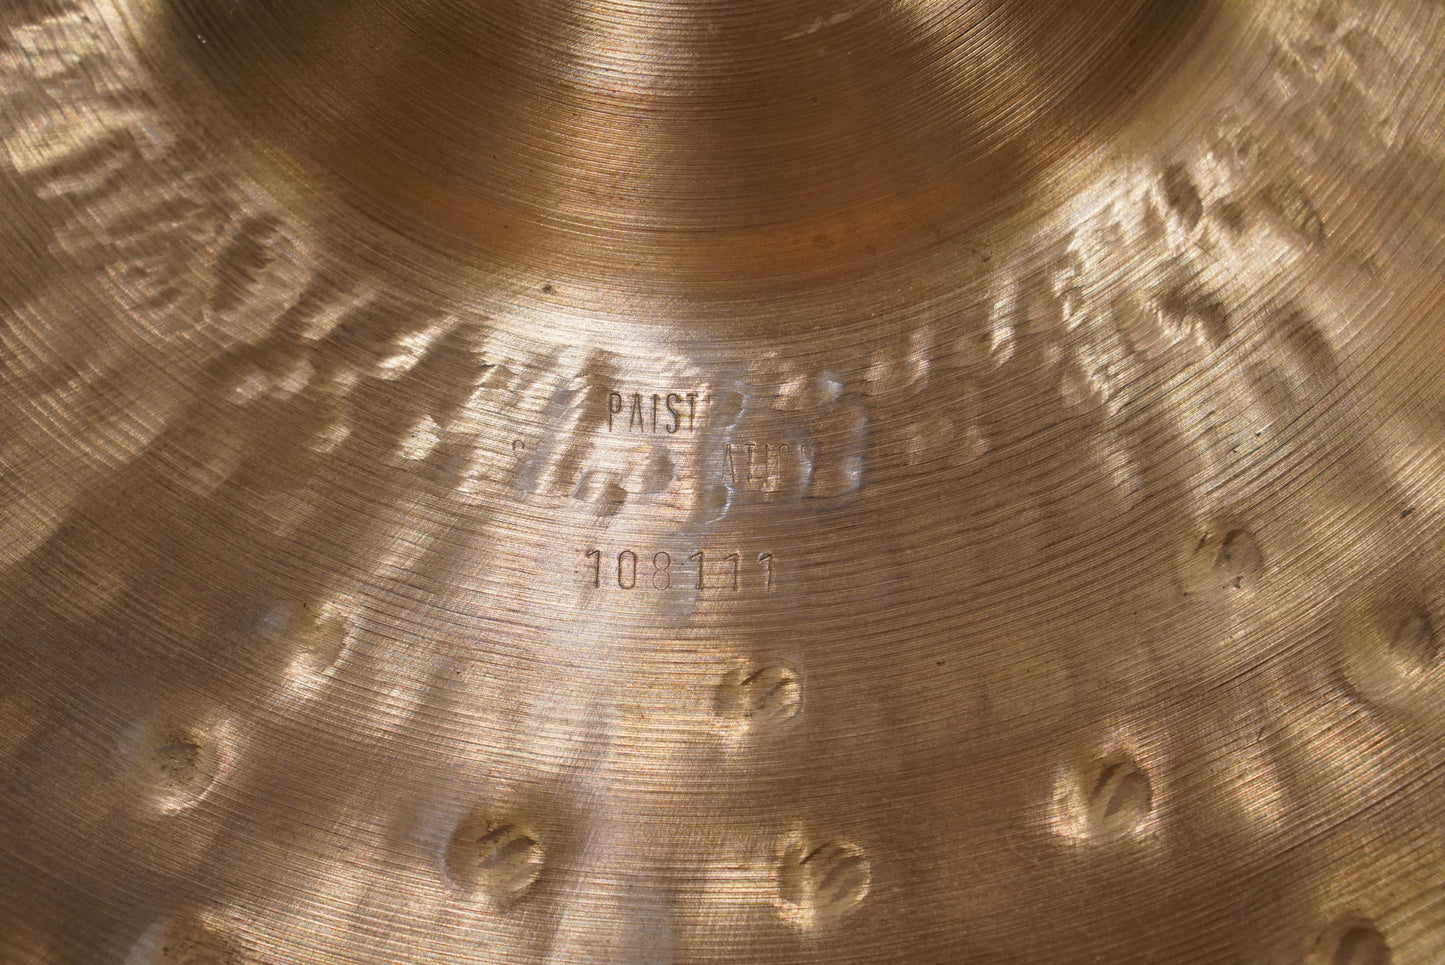 Paiste 20" Sound Creation Bell Ride Cymbal - 2768g